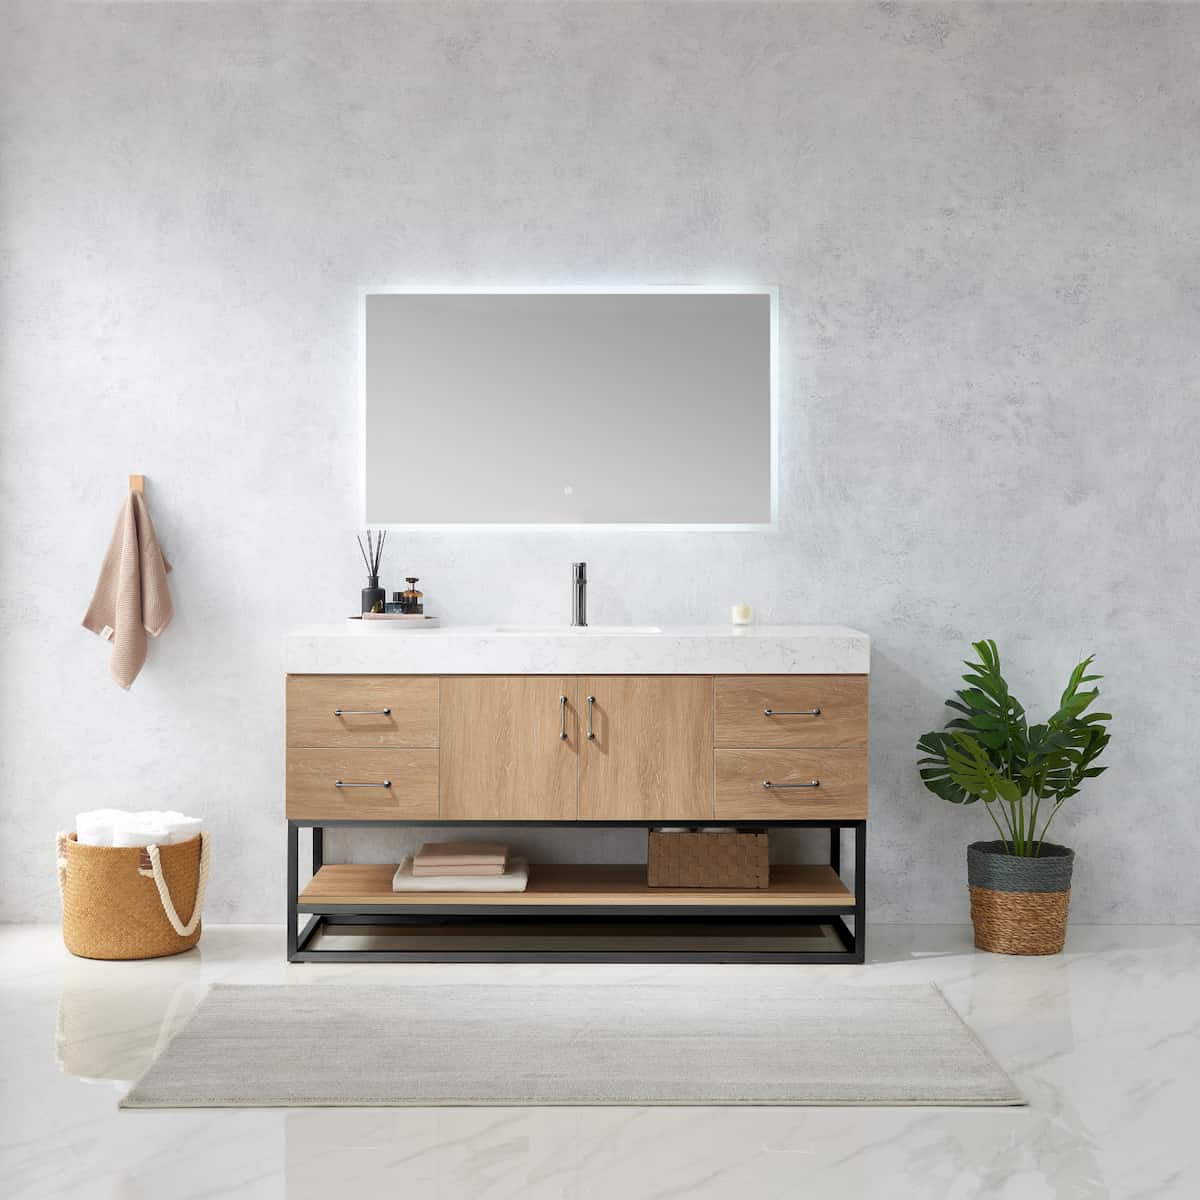 Vinnova Alistair 60 Inch Freestanding Single Vanity in North American Oak and Matte Black Frame with White Grain Stone Countertop With Mirror in Bathroom 789060BS-NO-GW